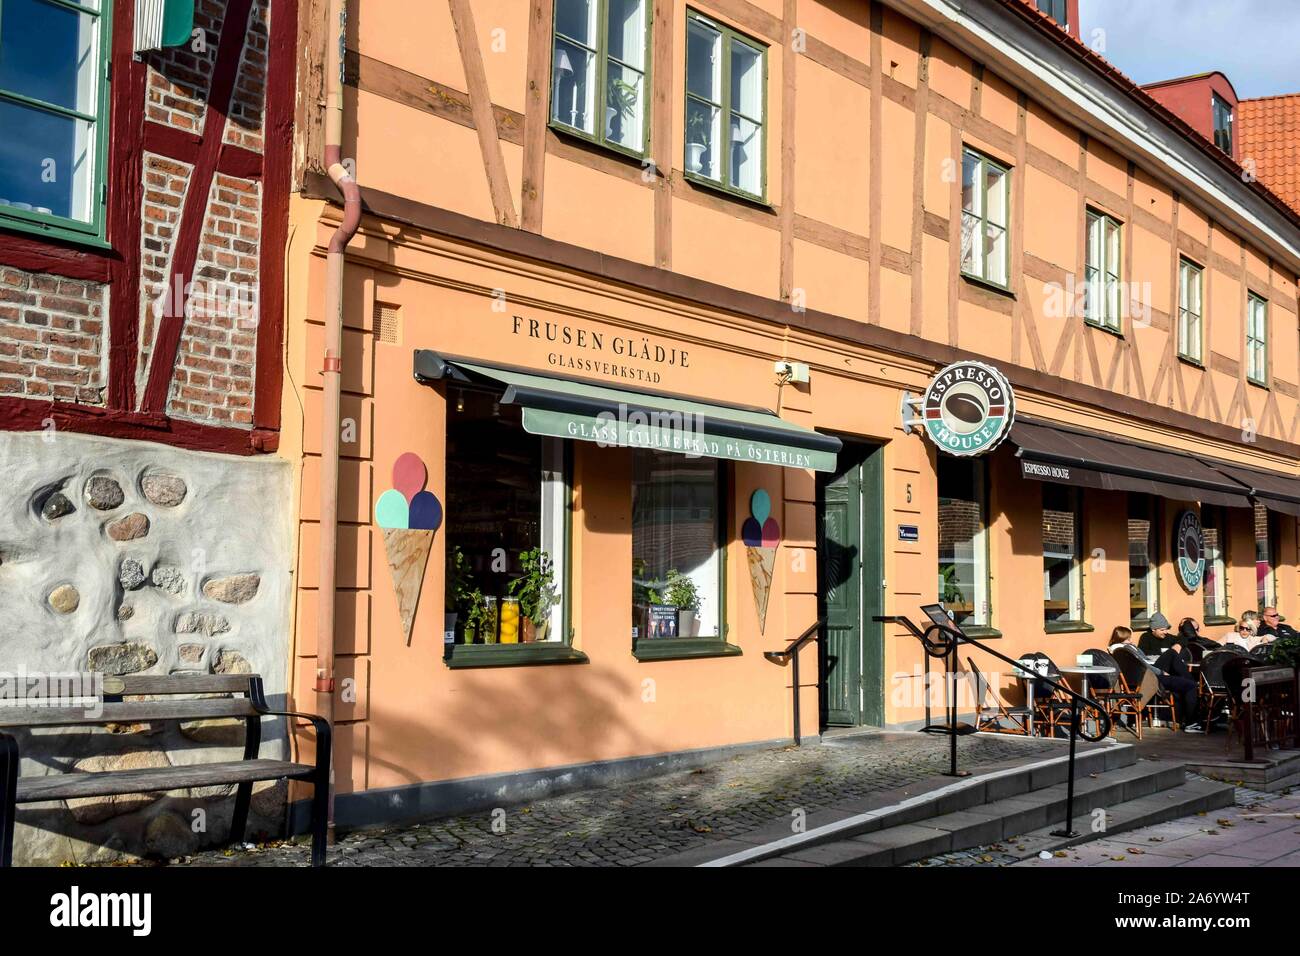 Espresso and ice cream in a sidewalk cafe setting in the Old Town of Ystad, Sweden. Stock Photo